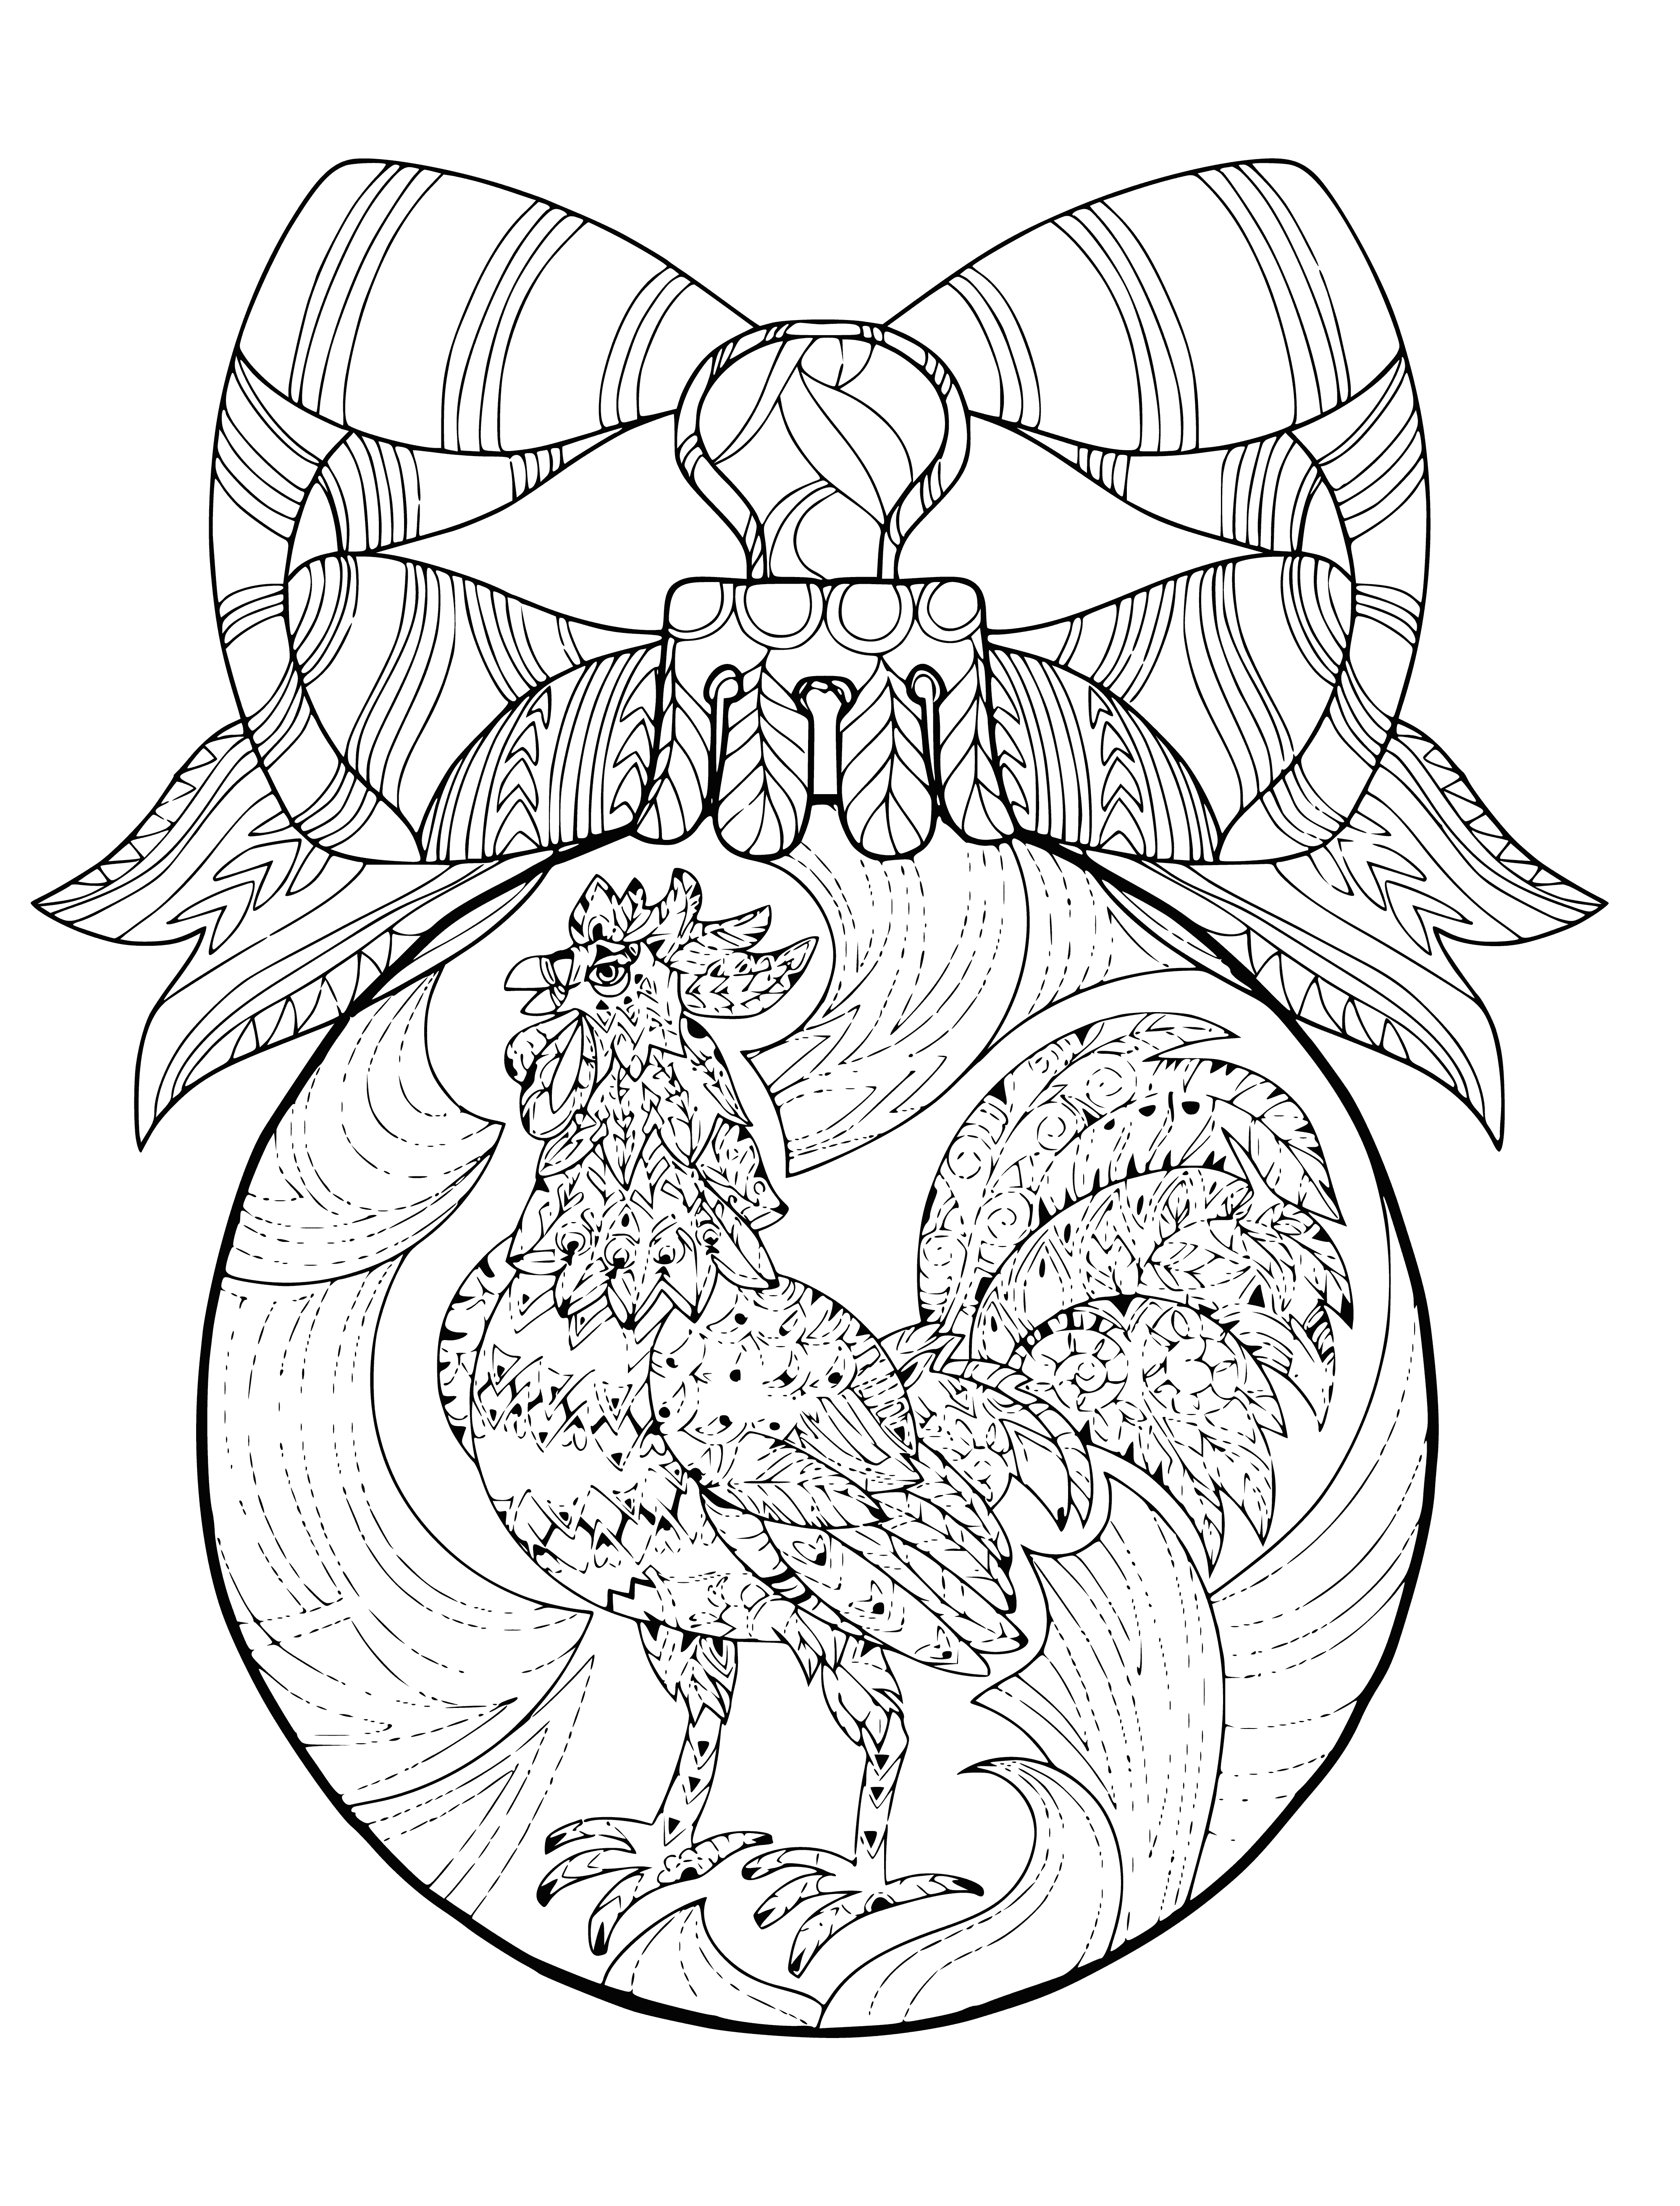 coloring page: Adorable rooster-shaped Christmas ball perches atop snow-covered surface with red-white colors, green wreath & gold star on head.